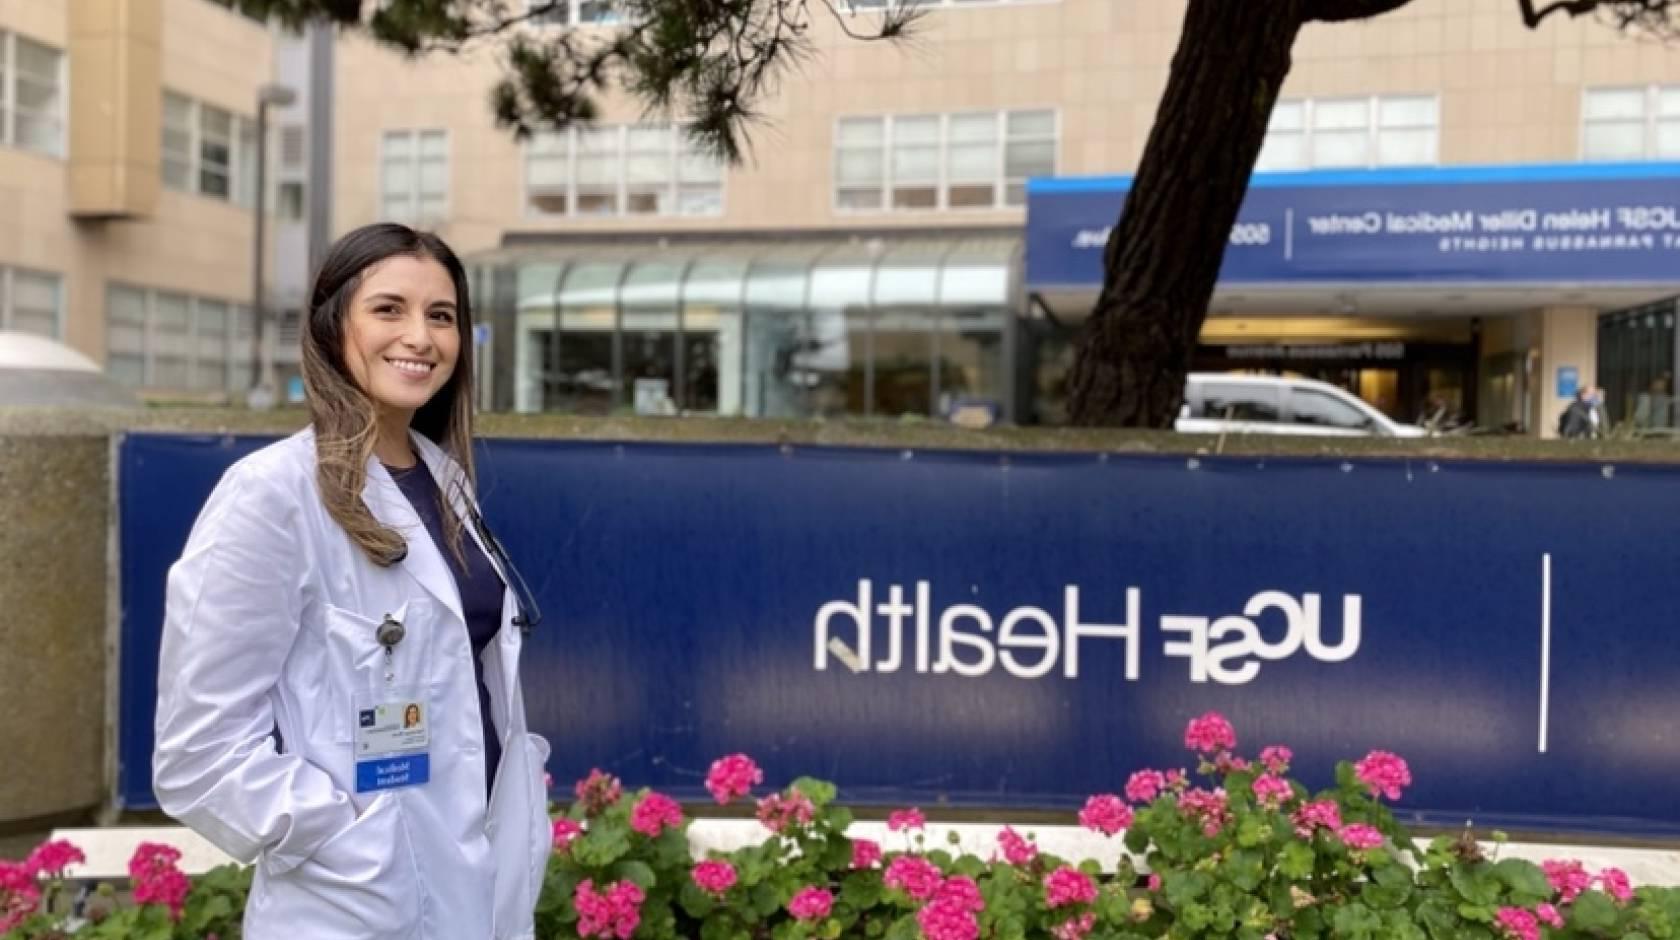 Vanessa Mora in a white coat in front of UCSF 健康 sign